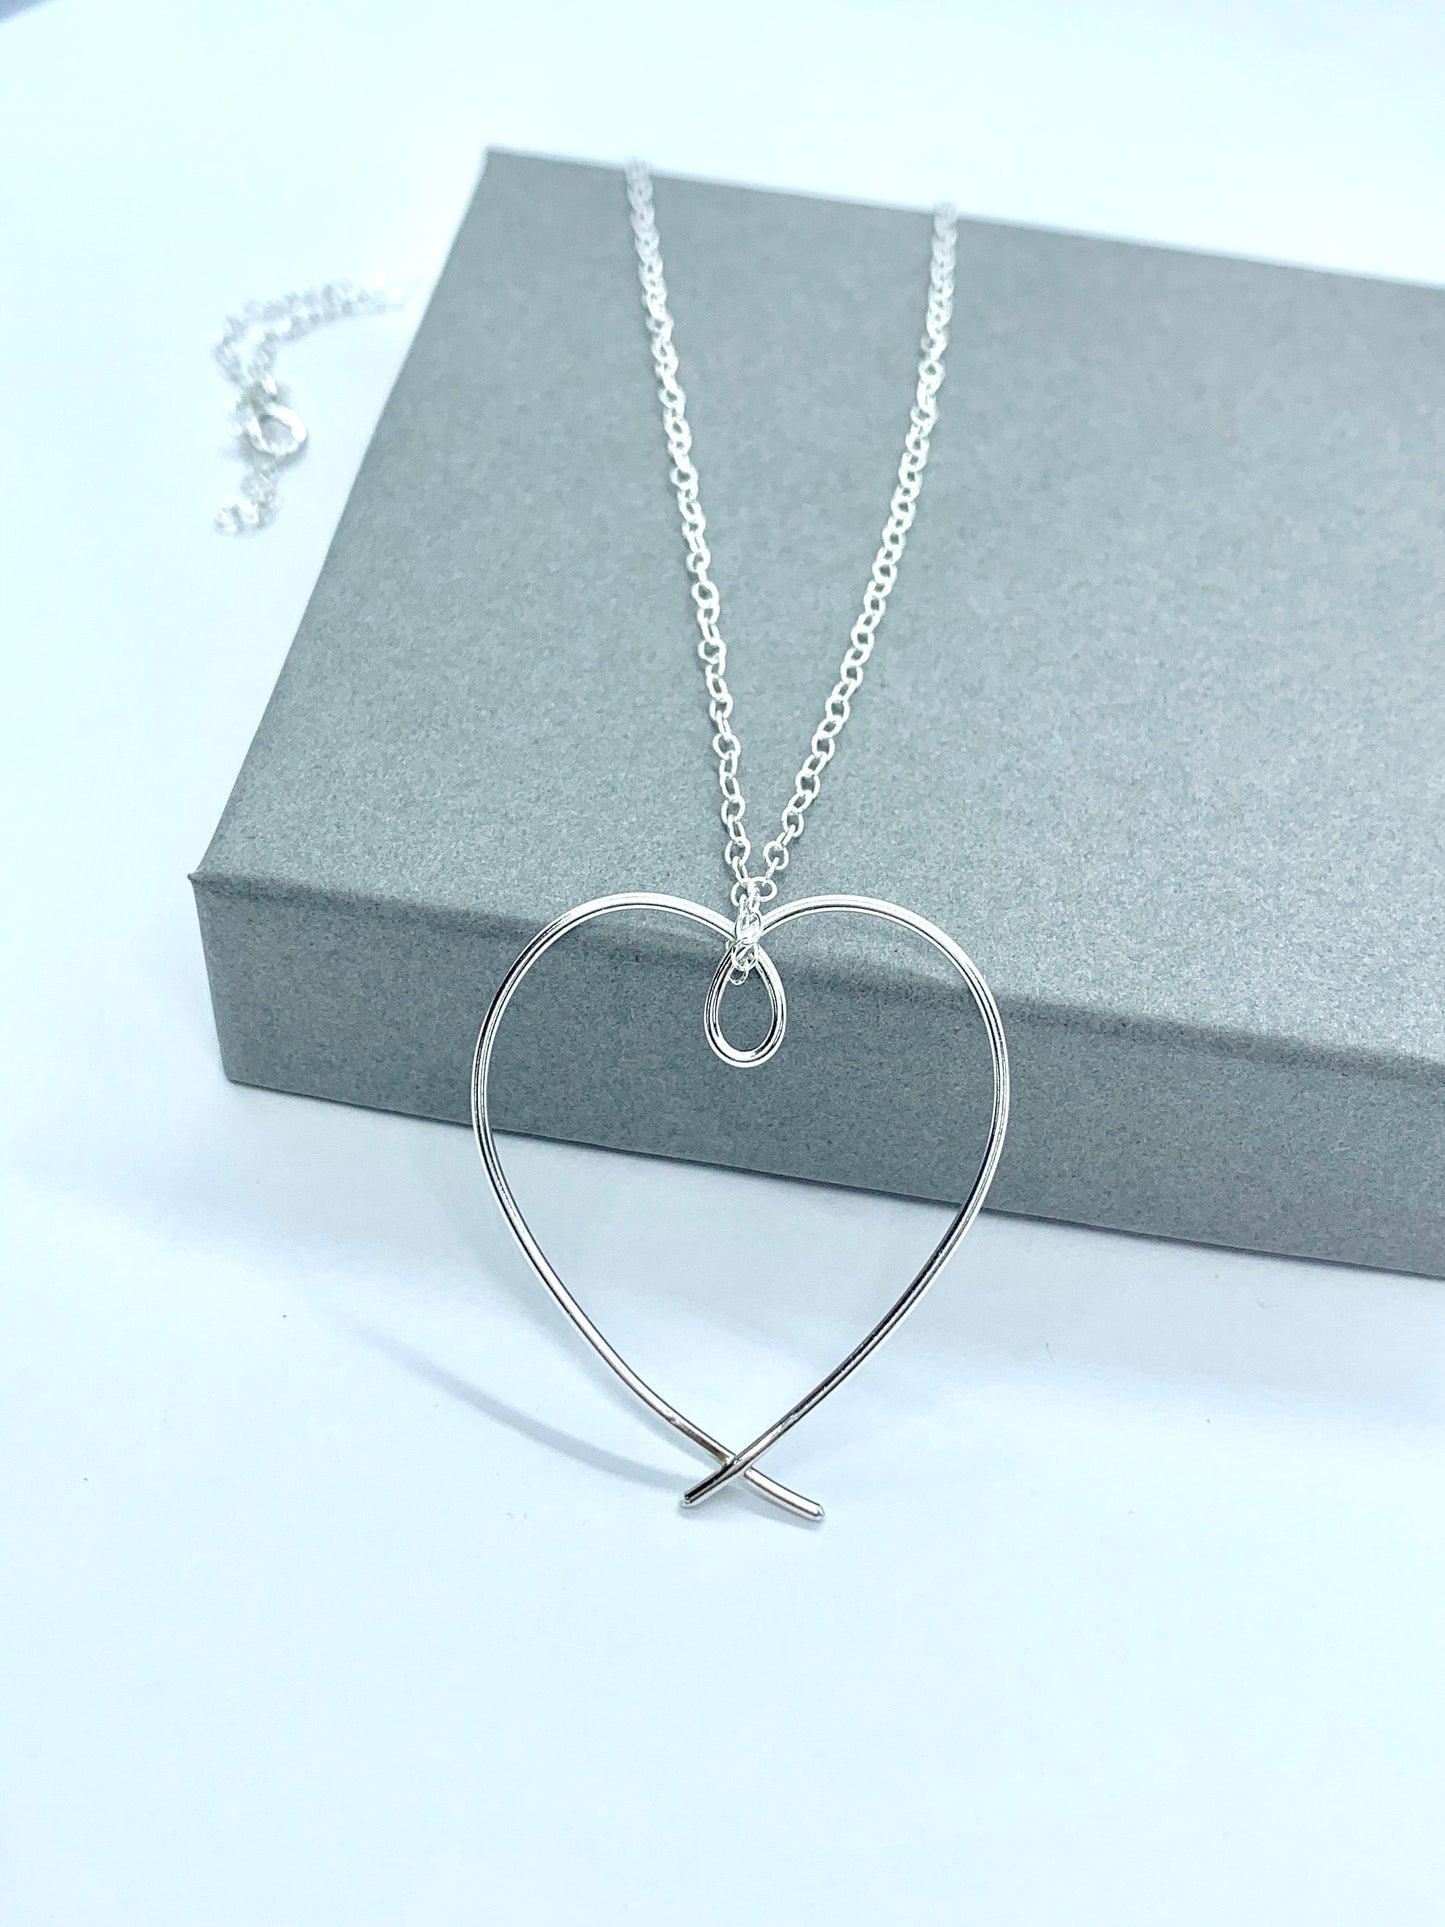 Large sterling silver heart necklace